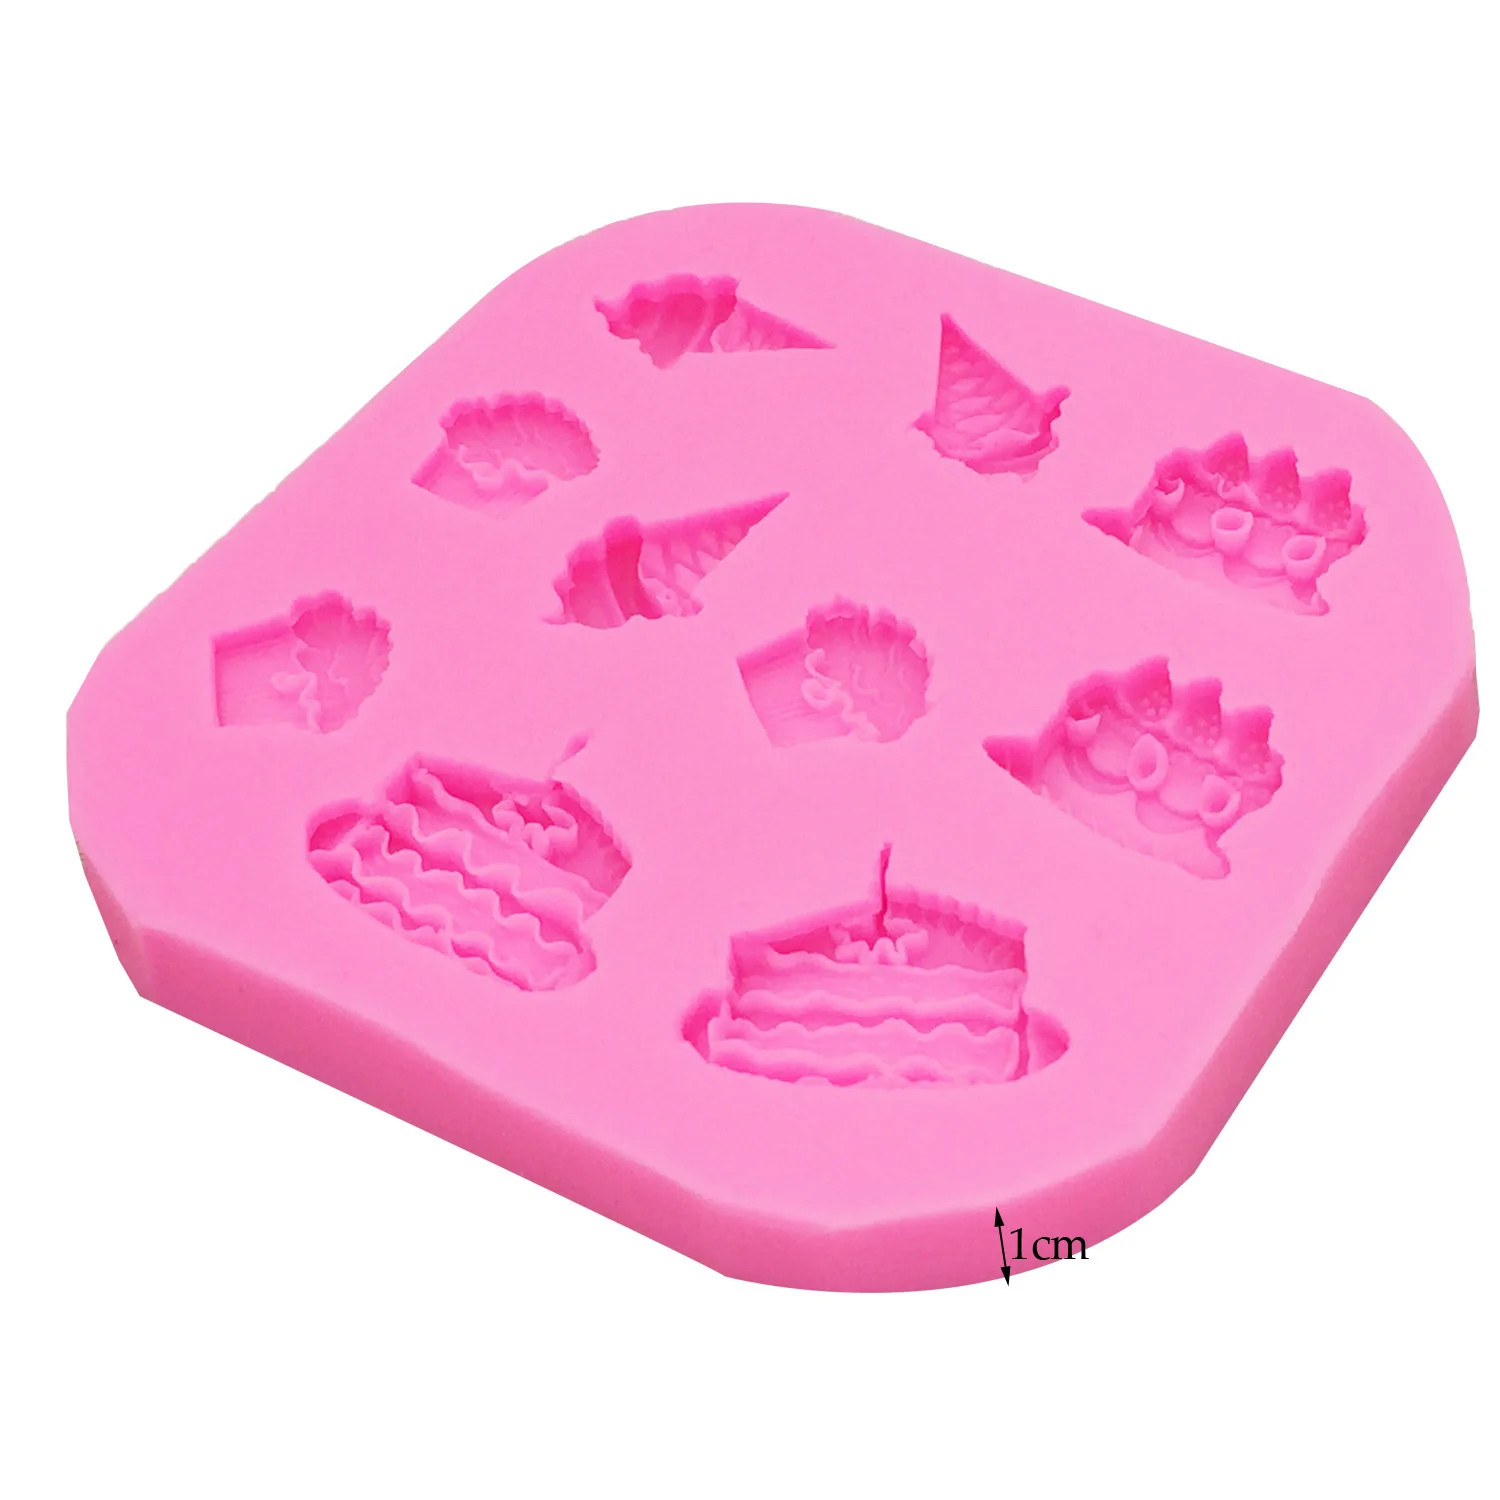 M0372 Cake ice cream shape chocolate molds cooking tools silicon Mould Fondant Decorating tools